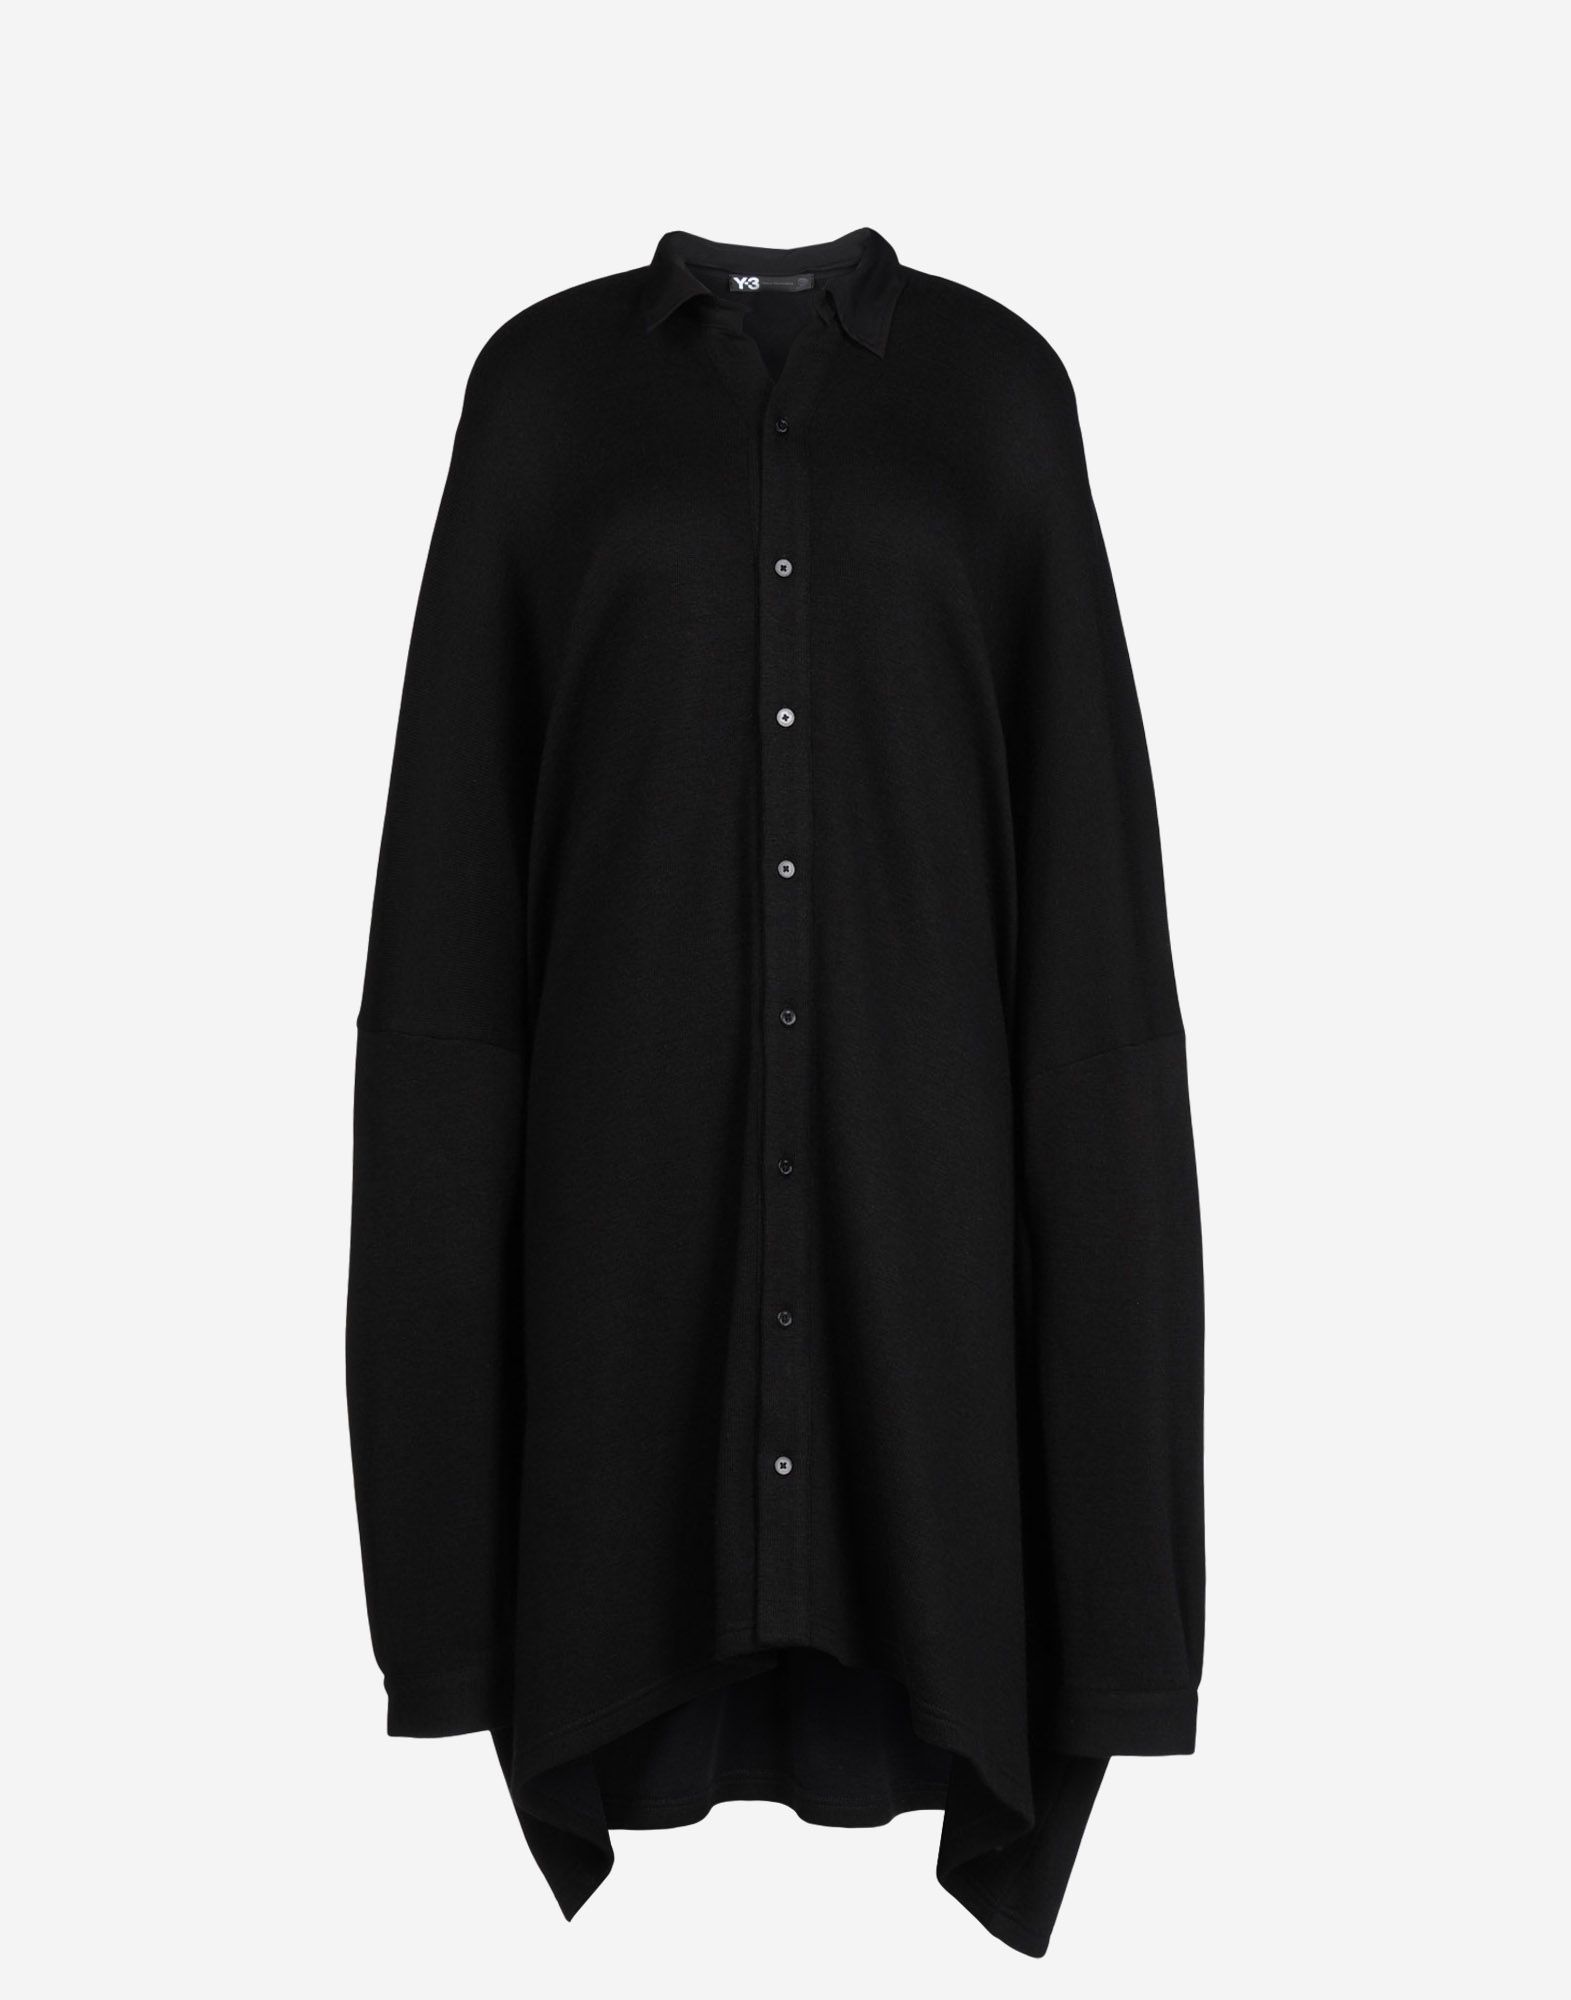 Y 3 Winter Shirt Dress for Women | Adidas Y-3 Official Store